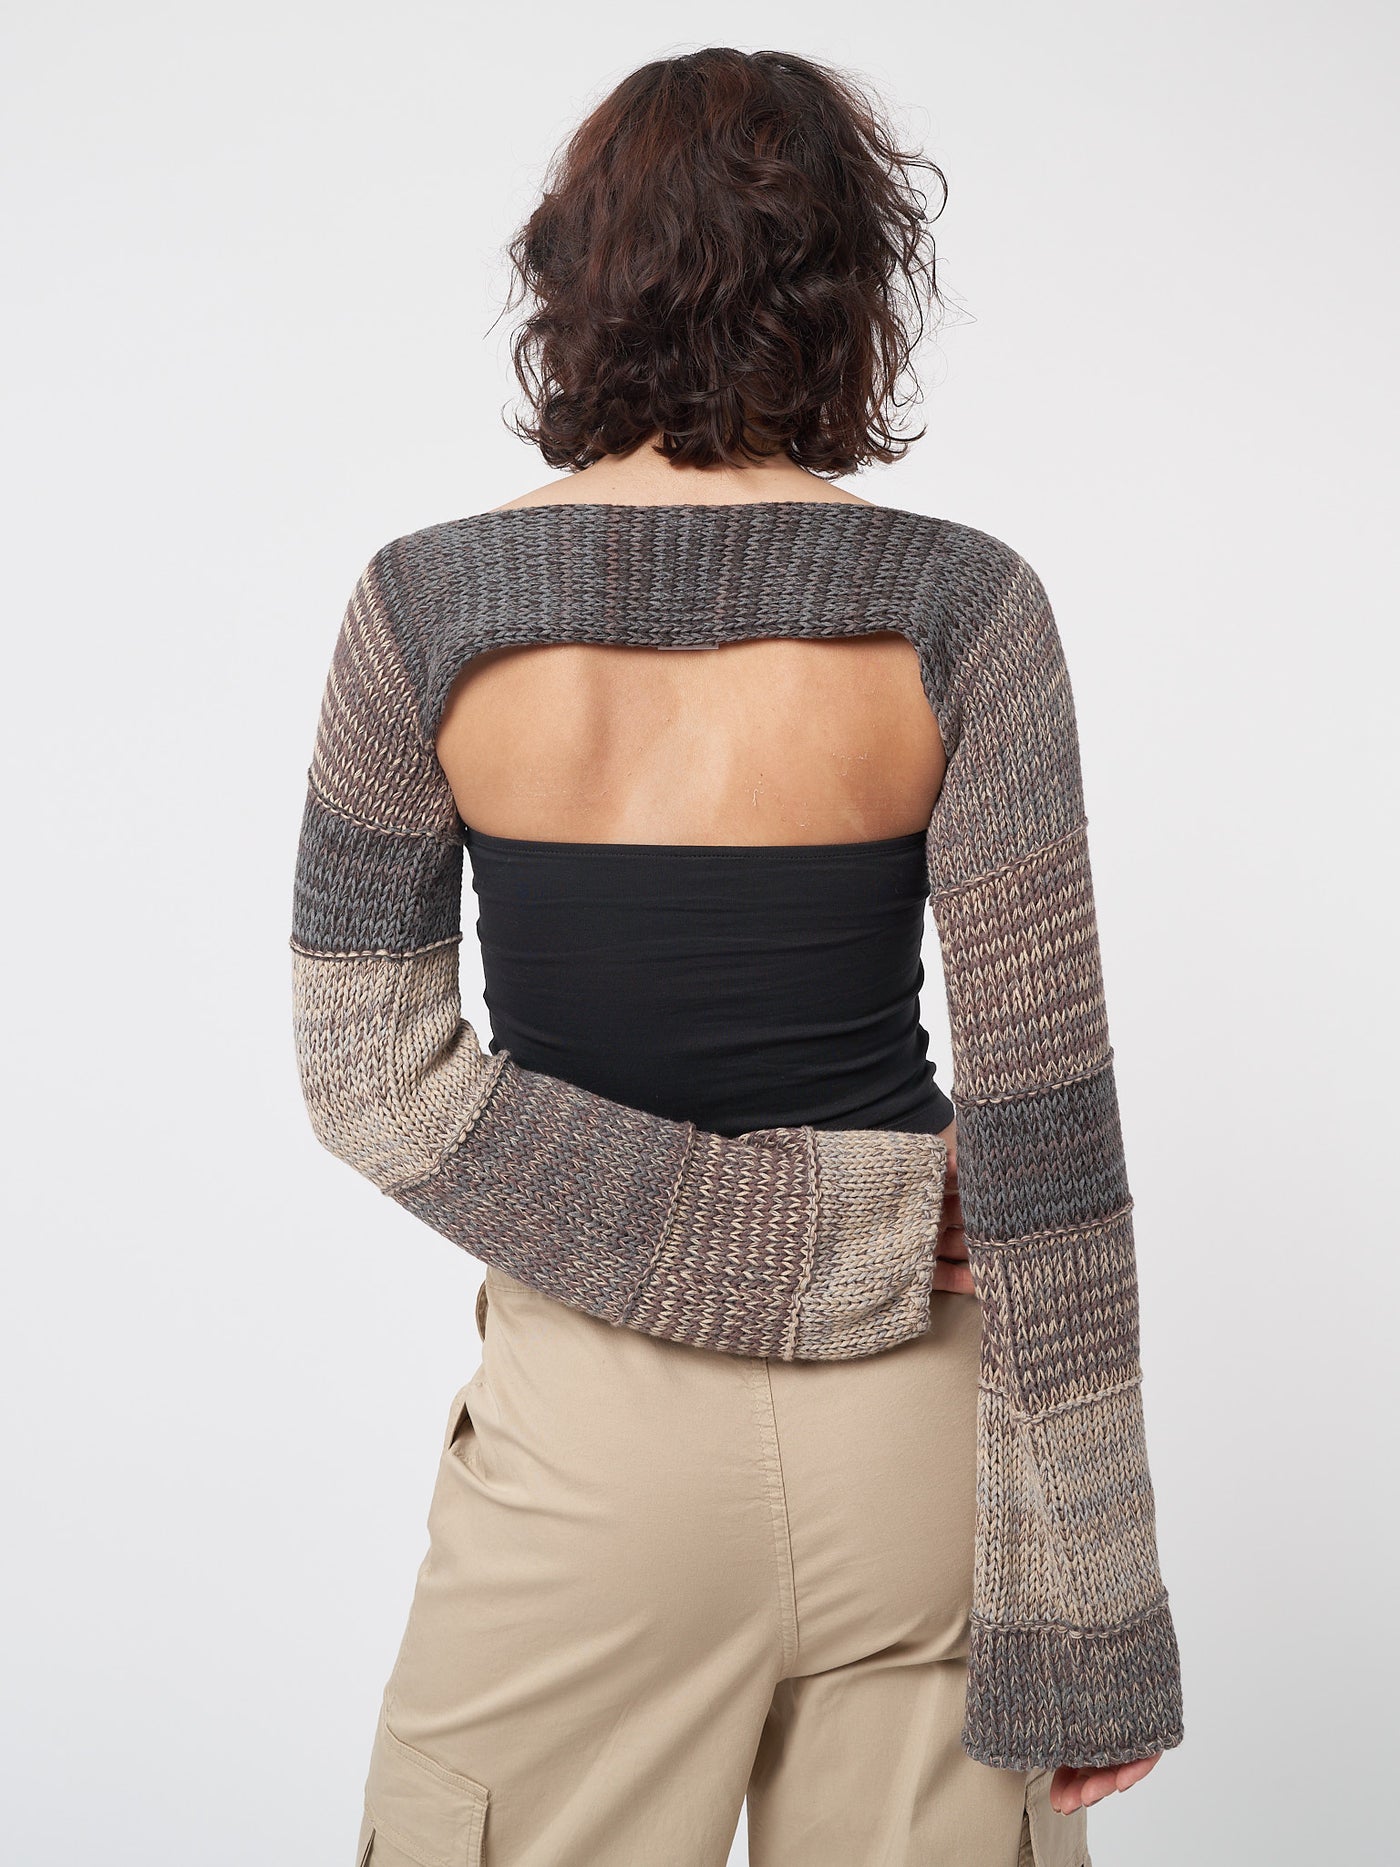 Bolero patchwork knitted shrug top in brown tones